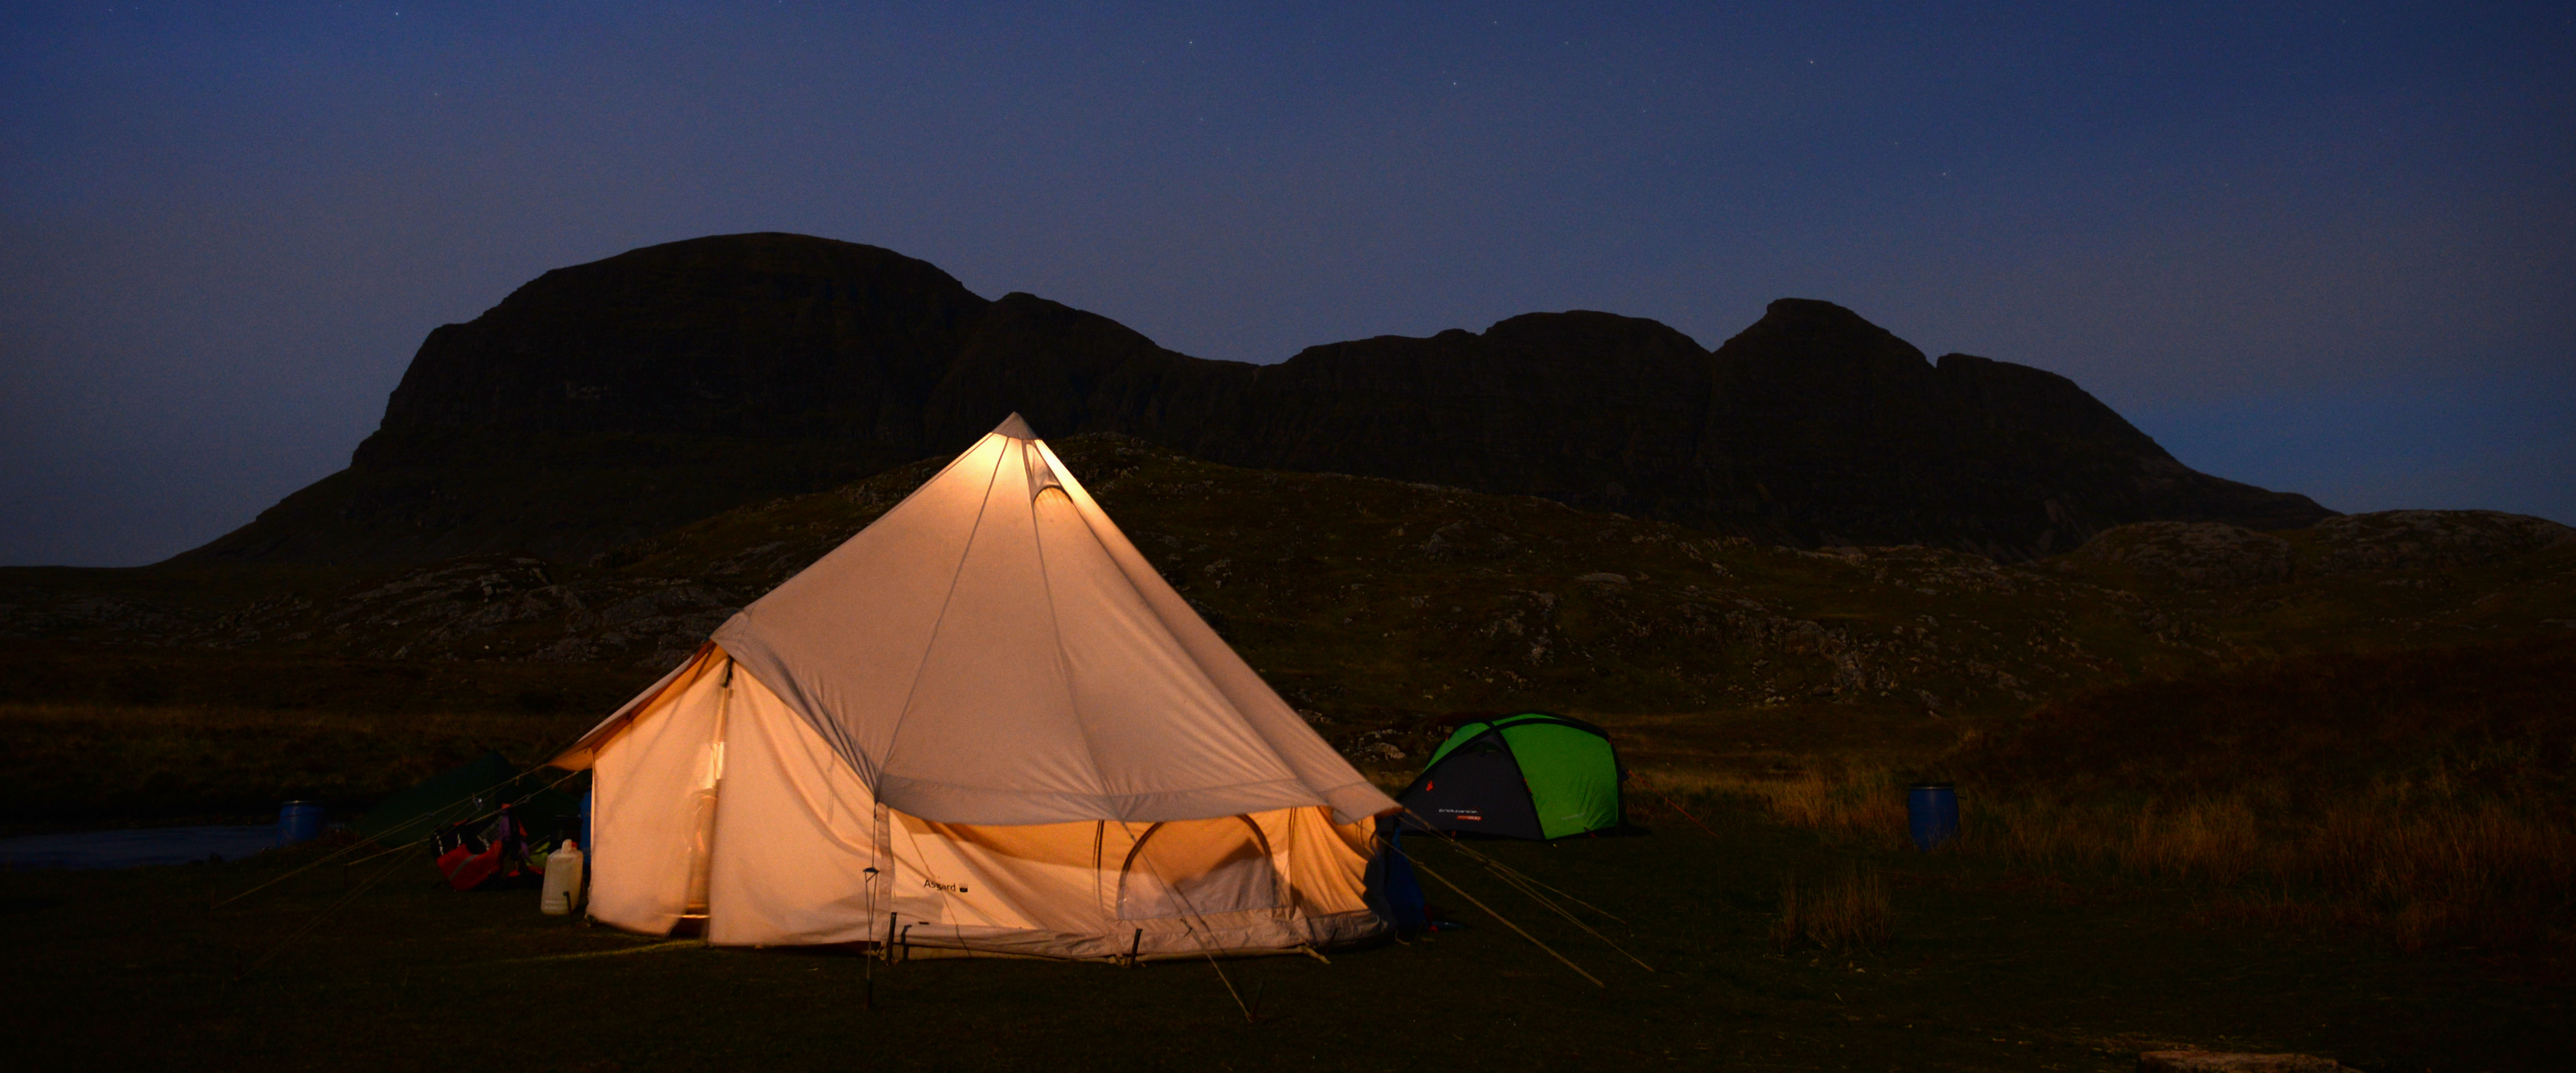 A lit-up tent at night under the stars with a hill behind